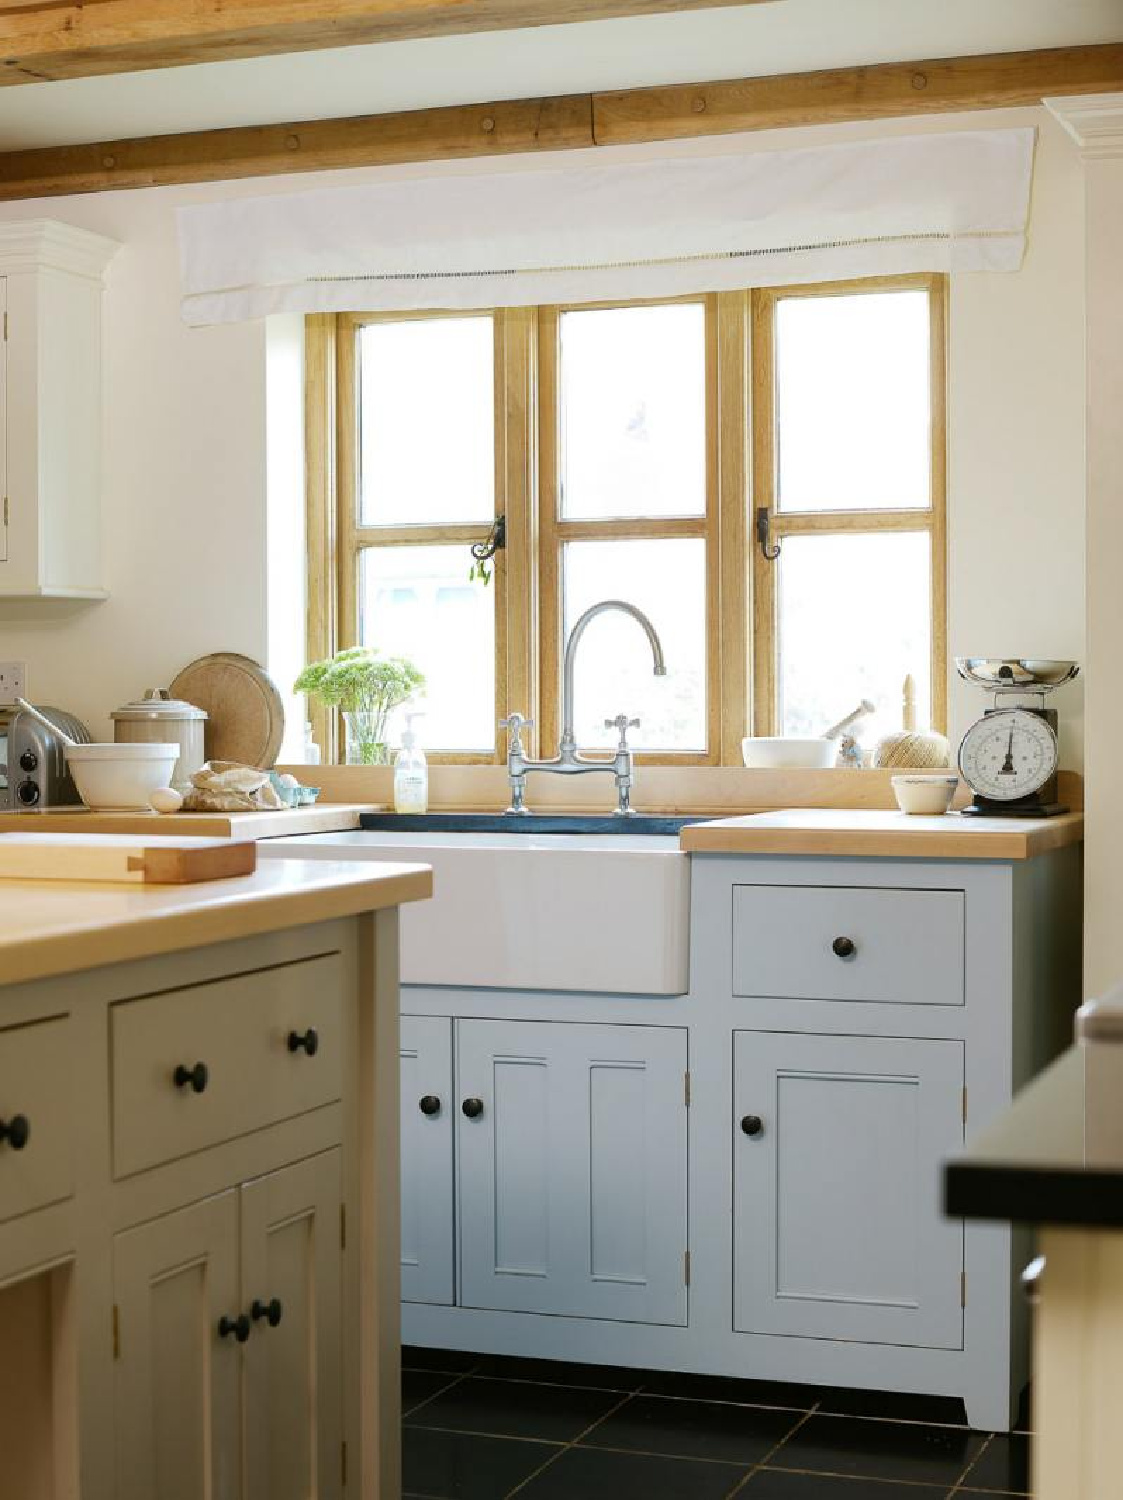 Beautiful English country bespoke kitchen by deVOL Kitchens. COME TOUR THESE cottage kitchens to inspire! #countrykitchen #englishcountry #shakerkitchen #cottagekitchens #kitchendesign